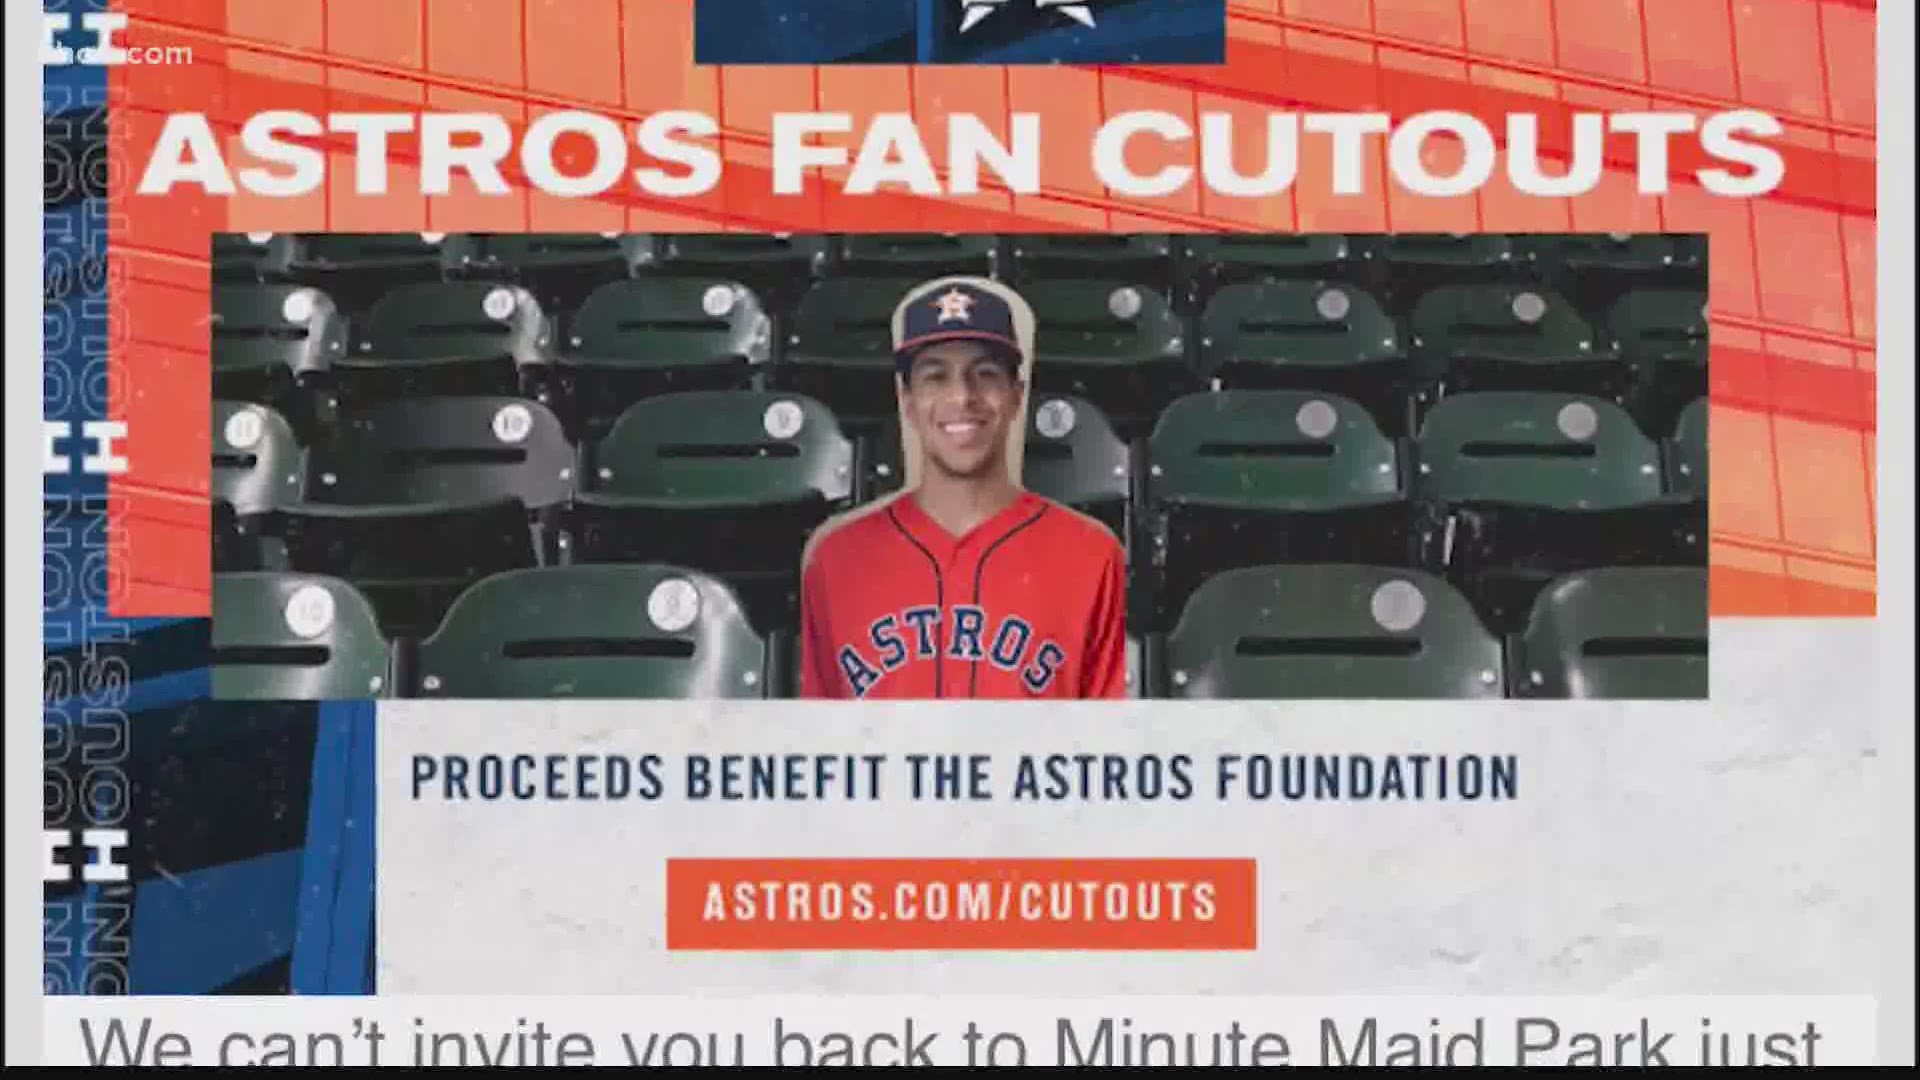 Houston Astros fans may not be able to attend games right now, but they have a chance to see their faces on TV at Minute Maid Park.